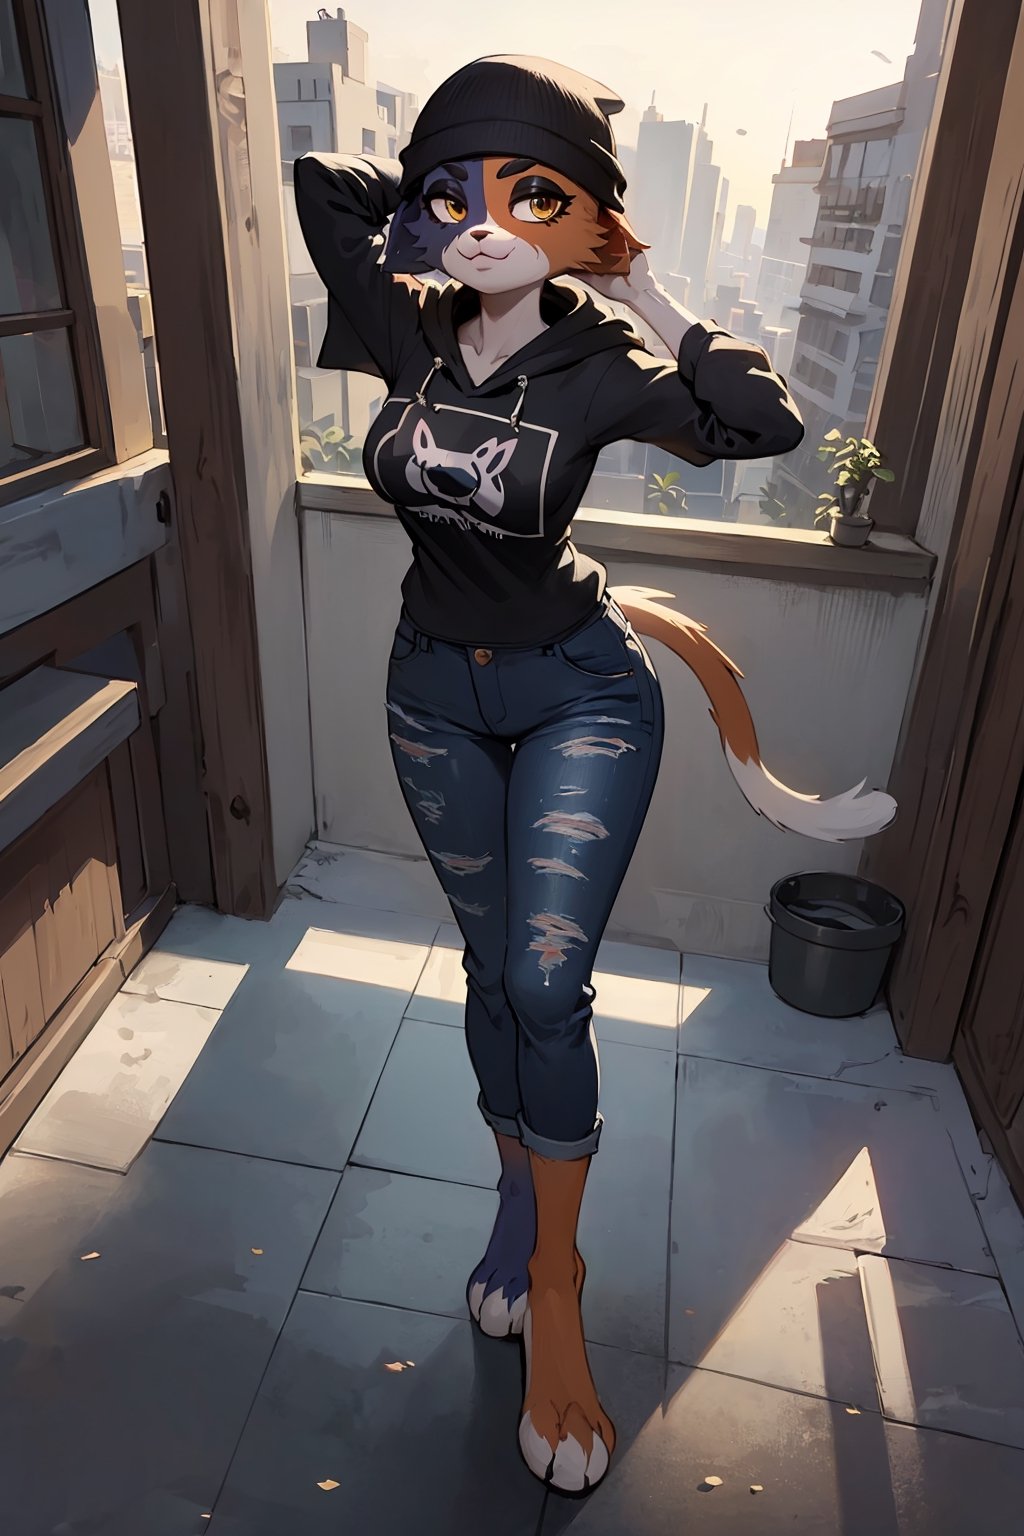 Uploaded on e621, by Pixelsketcher, by Bayard Wu, by Thomas Benjamin Kennington, by Einshelm, solo anthro, ((full body portrait)), (( wearing cropped hoodie and tight denim short)), (detailed Bonifasko lighting), (detailed fur), (detailed skin), ((wearing cropped hoodie and tight denim short)), ((facing viewer )), (cinematic lighting), ((detailed city background)), ((full body view)), ((from above)) (((portrait view))), ((full body)), (half shadow), [backlighting], [crepuscular ray], [detailed ambient light], [grey natural lighting], [ambient light], (higher wildlife feral detail), [sharp focus], (questionable content), (shaded), ((masterpiece), regular featureless breasts, breasts, furry cat, cat face, Furry Fantasy Art, Anthro Art, Commission for High Res, Furry Art, furry Art, Sakimichan beautiful, masterpiece, regular featureless breasts, best quality, detailed image, bright colors, detailed face, perfect lighting, perfect shadows, perfect eyes, girl focus, cat eyes, flawless face, regular featureless breasts, gorgeous, shiny face, face focus, cat ears, cat girl, fluffy, fluffy woman, face fur, animal nose, muzzle, one-tone fur, gaze at the viewer, half-closed eyes, 1girl, solo, full face only, (masterpiece), (best quality), (illustration), (cinematic lighting), detailed fur, balanced coloring, global illumination, ray tracing, good lighting, cat, furry, anthro, attractive face, sexy face, looking at viewer, seductive look, full body picture, perfect legs, meowskulls , detailed hoodie and denim short, Marlok artstyle,Marlok artstyle , beautiful girl ,hourglass body shape, posing, hands behind head,meowskulls